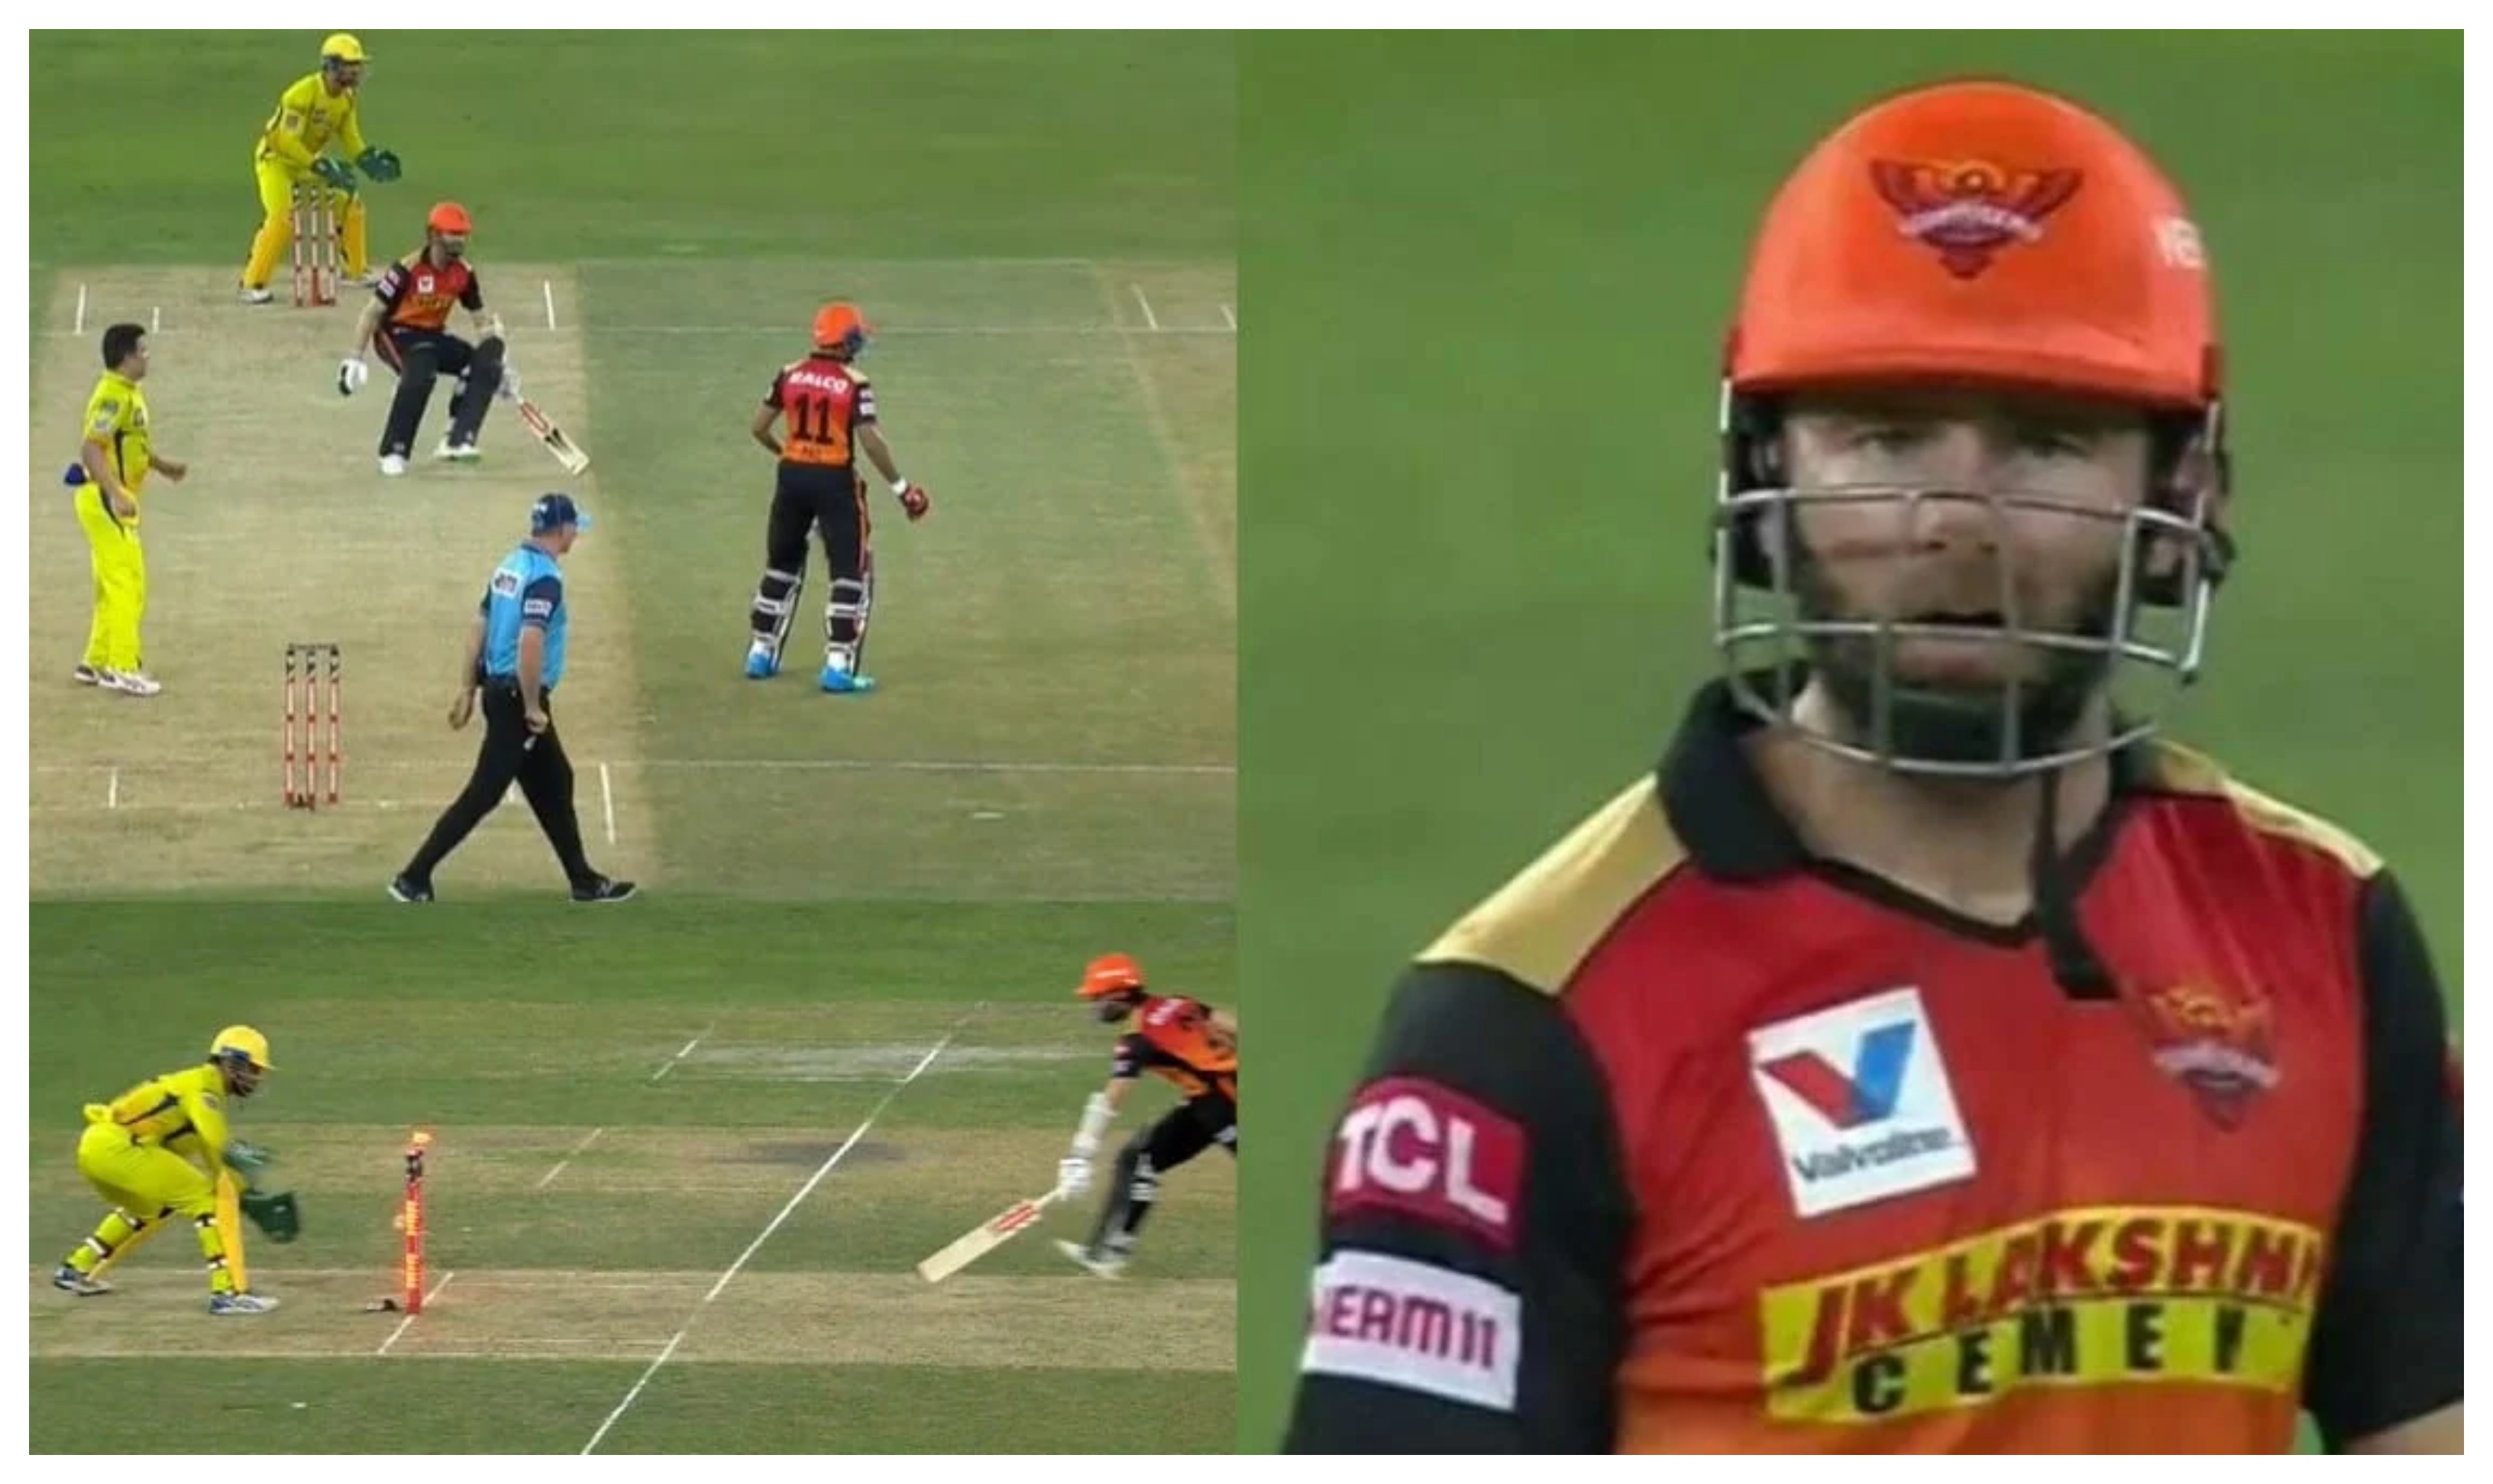 Williamson was quite animated after his dismissal | Screengrab